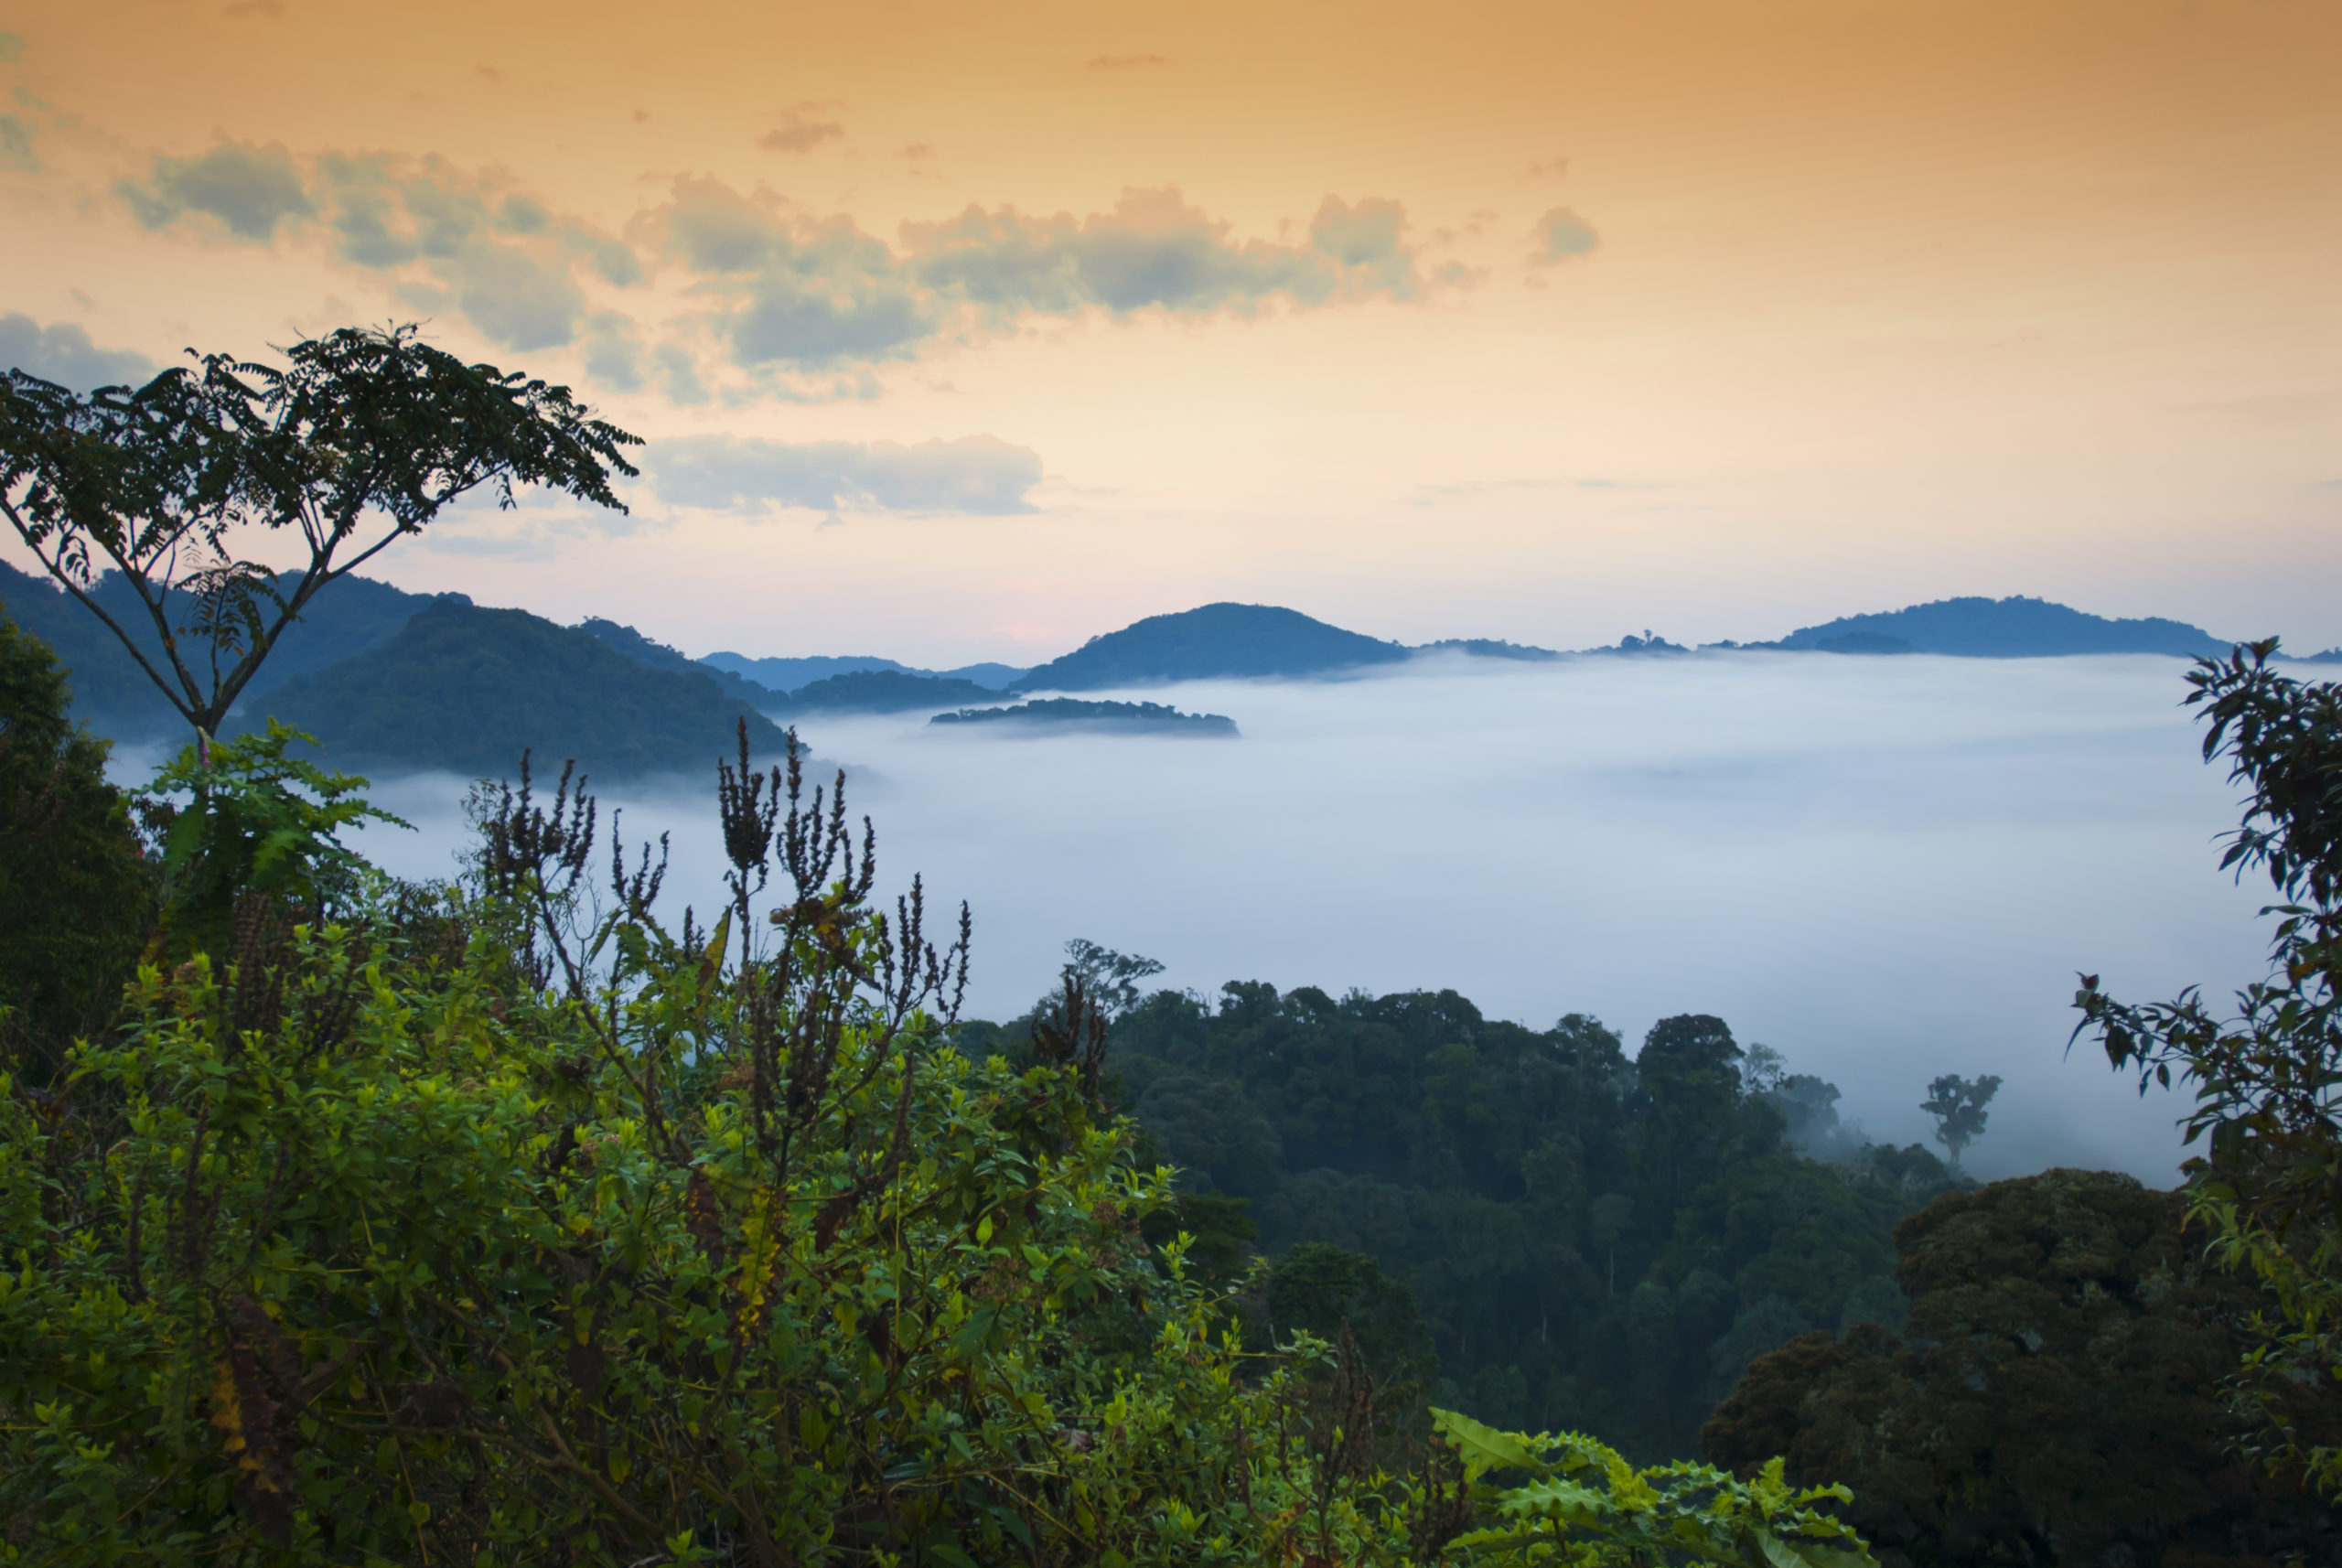 Experience extraordinary landscape like this tropical cloud forest in Nyungwe National Park, Rwanda, when you take a tailor-made holiday with Alfred&.